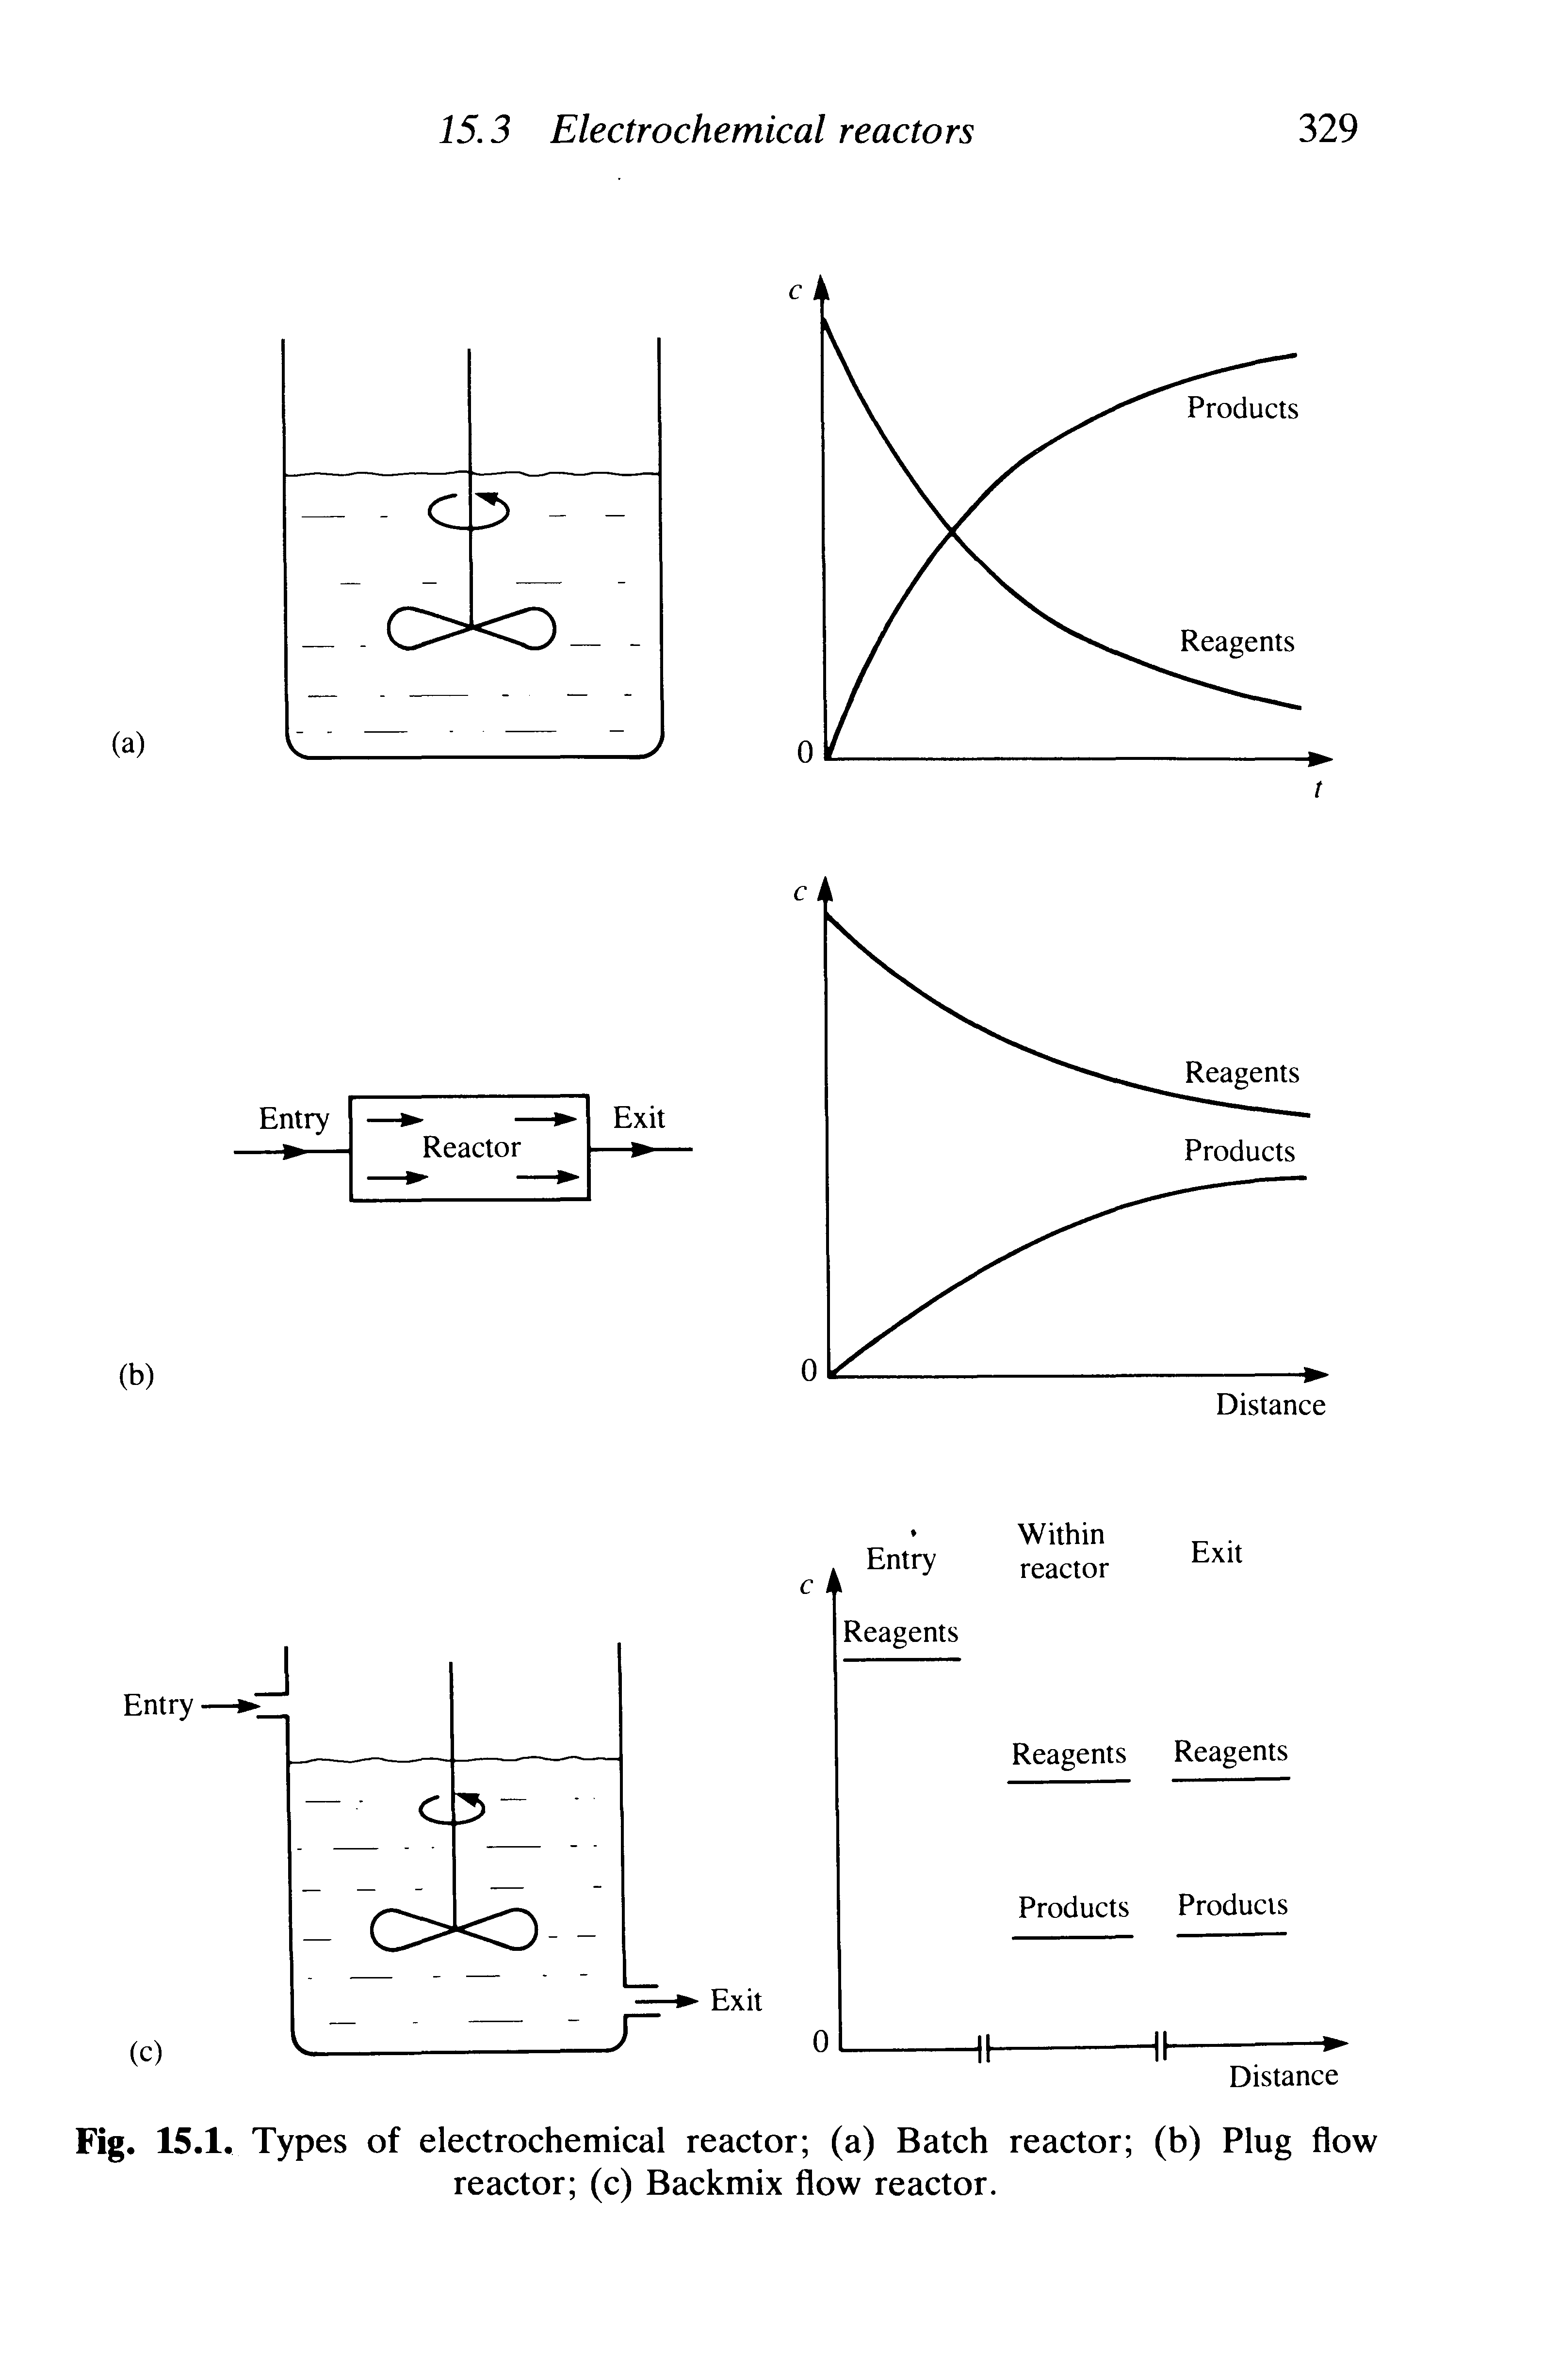 Fig. 15.1. Types of electrochemical reactor (a) Batch reactor (b) Plug flow reactor (c) Backmix flow reactor.